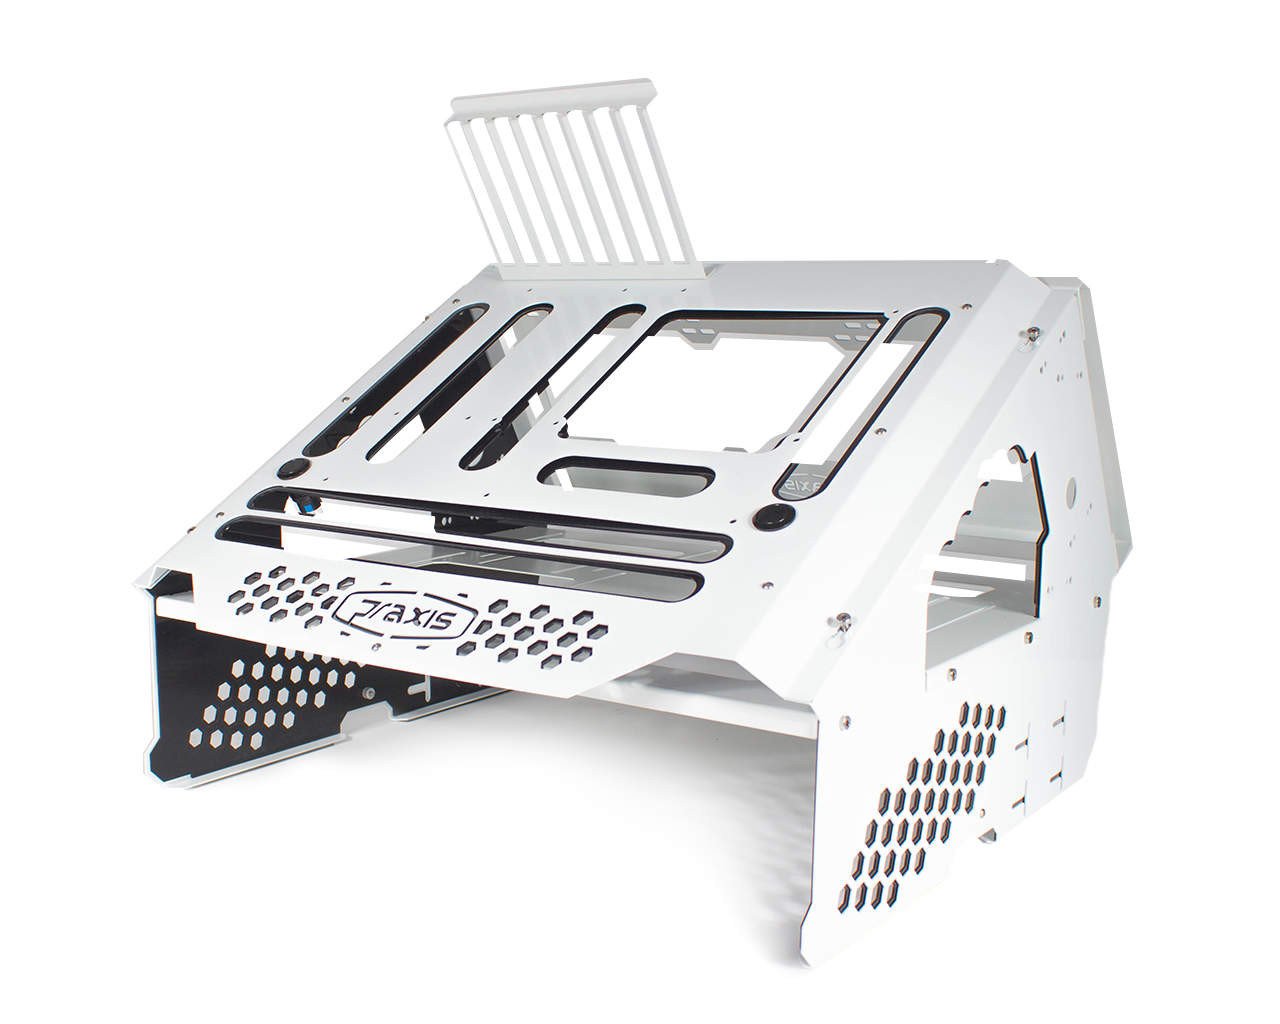 PrimoChill's Praxis Wetbench Powdercoated Steel Modular Open Air Computer Test Bench for Watercooling or Air Cooled Components - PrimoChill - KEEPING IT COOL White w/Black Accents